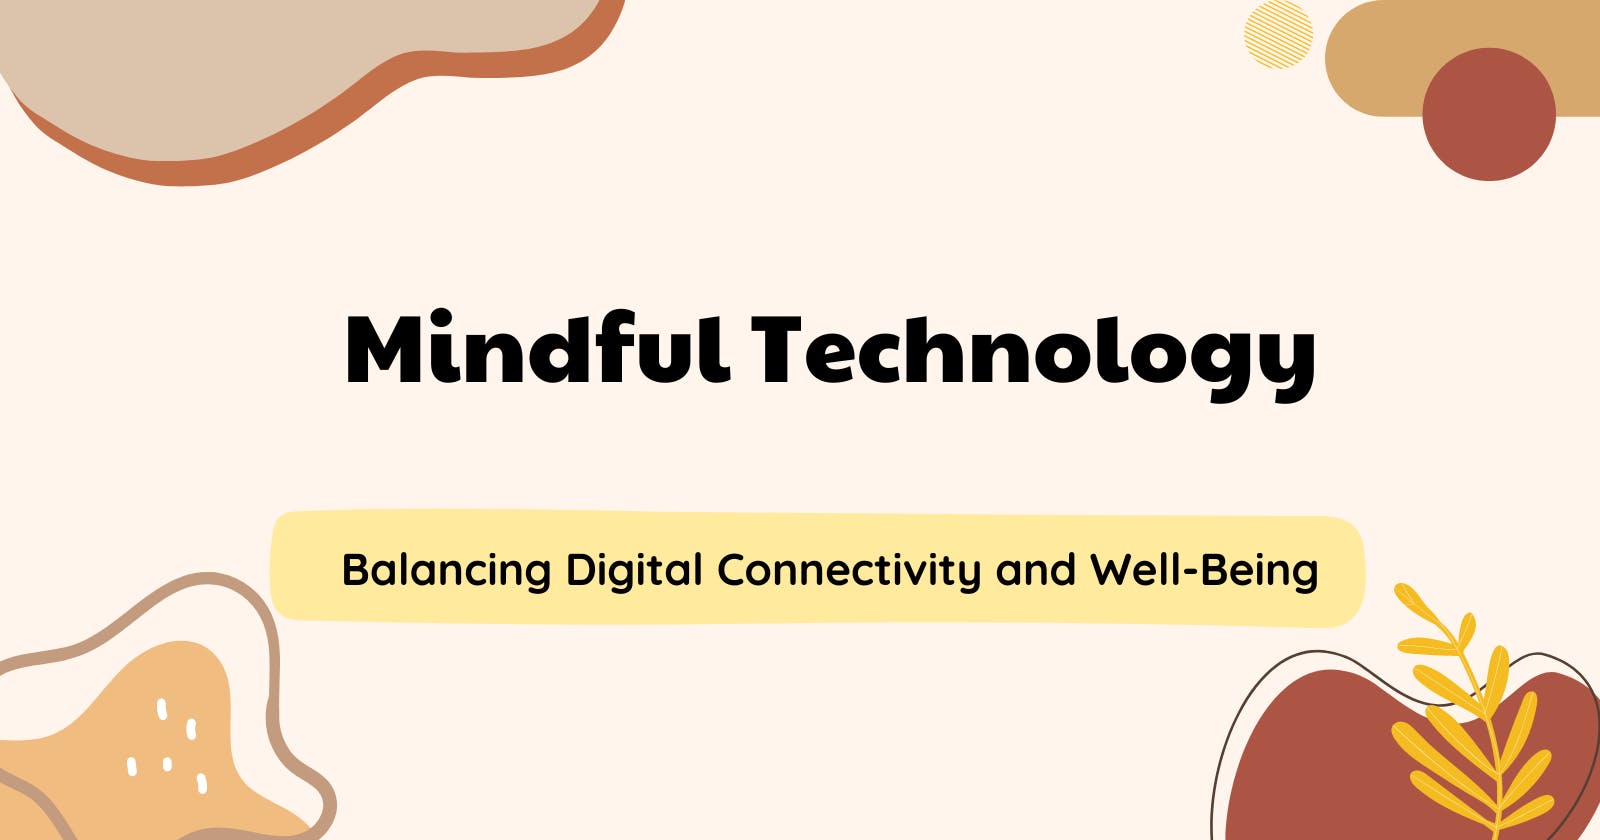 Mindful Technology: Balancing Digital Connectivity and Well-Being